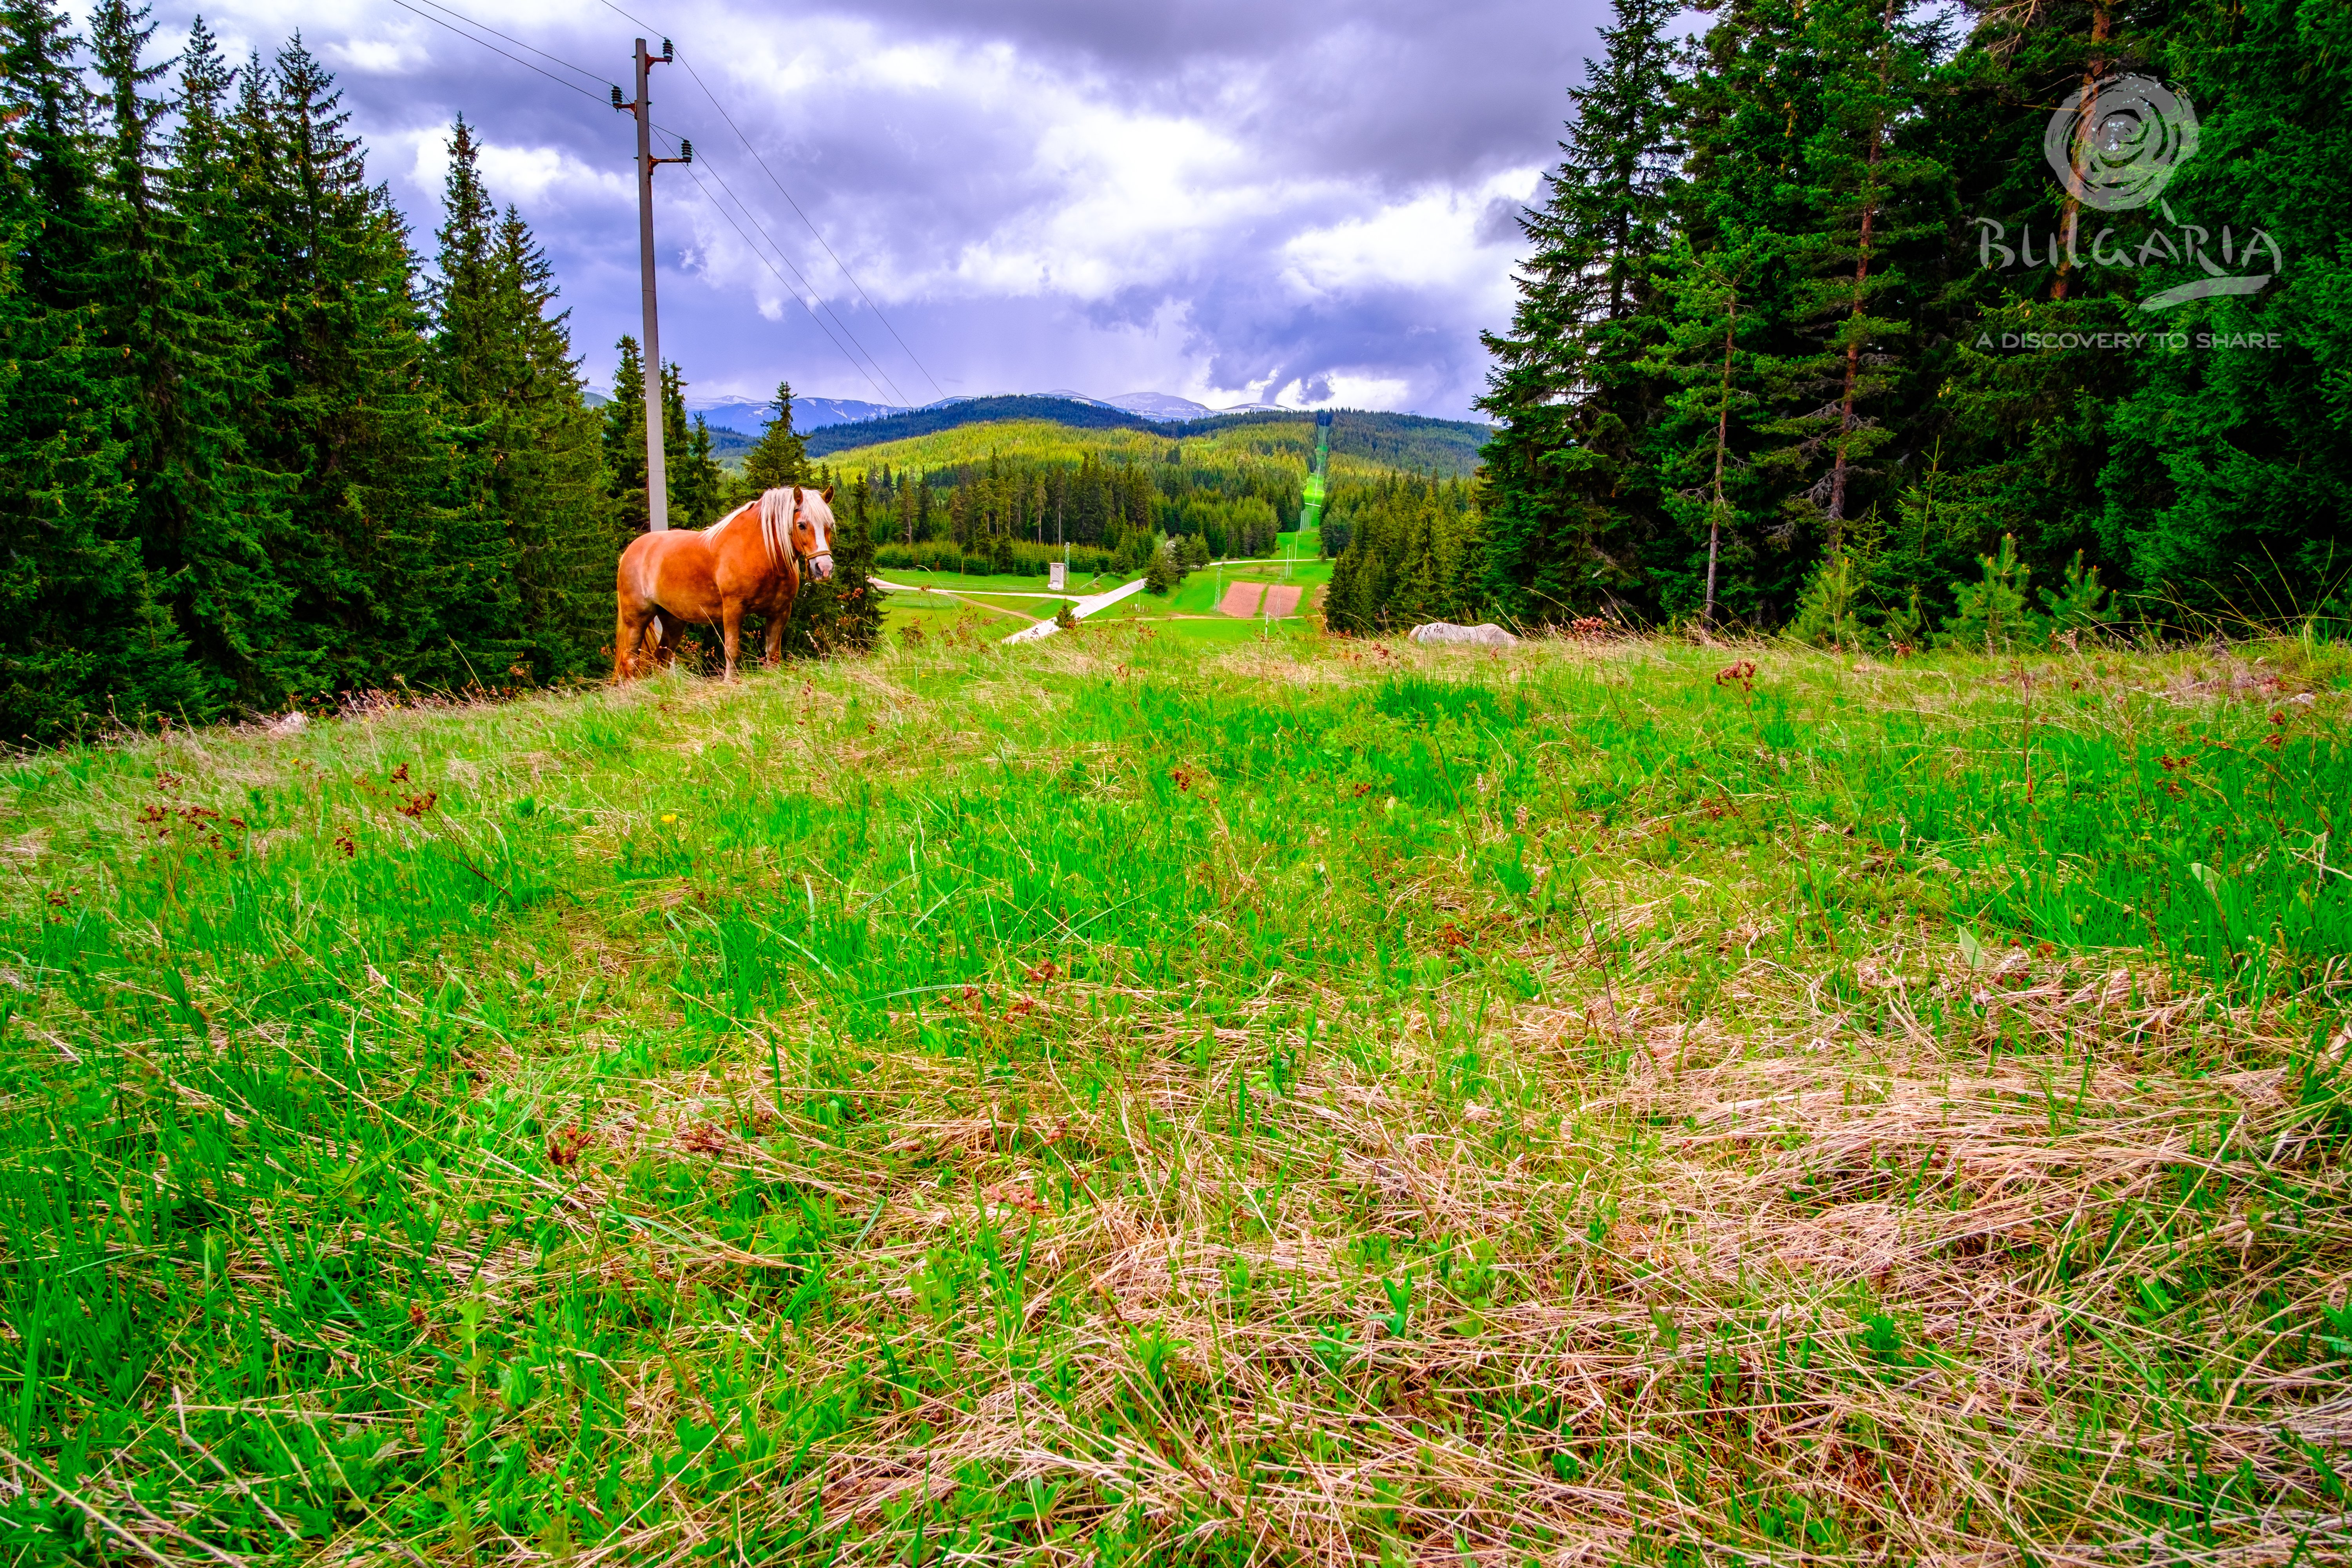 a horse standing in a grassy field